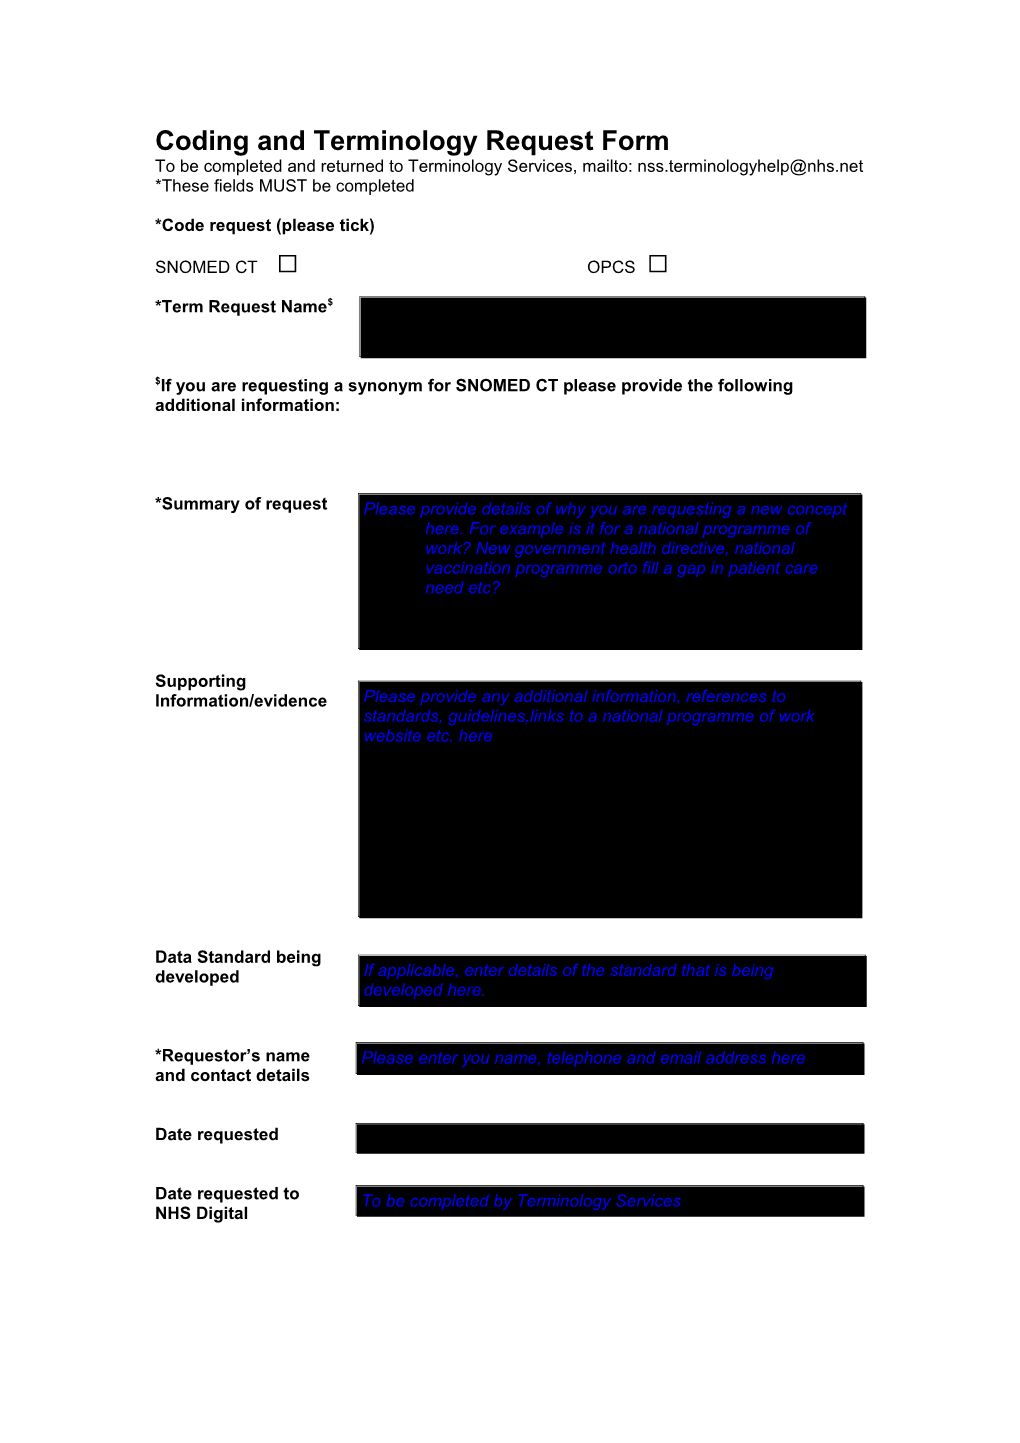 SNOMED-CT Request Form